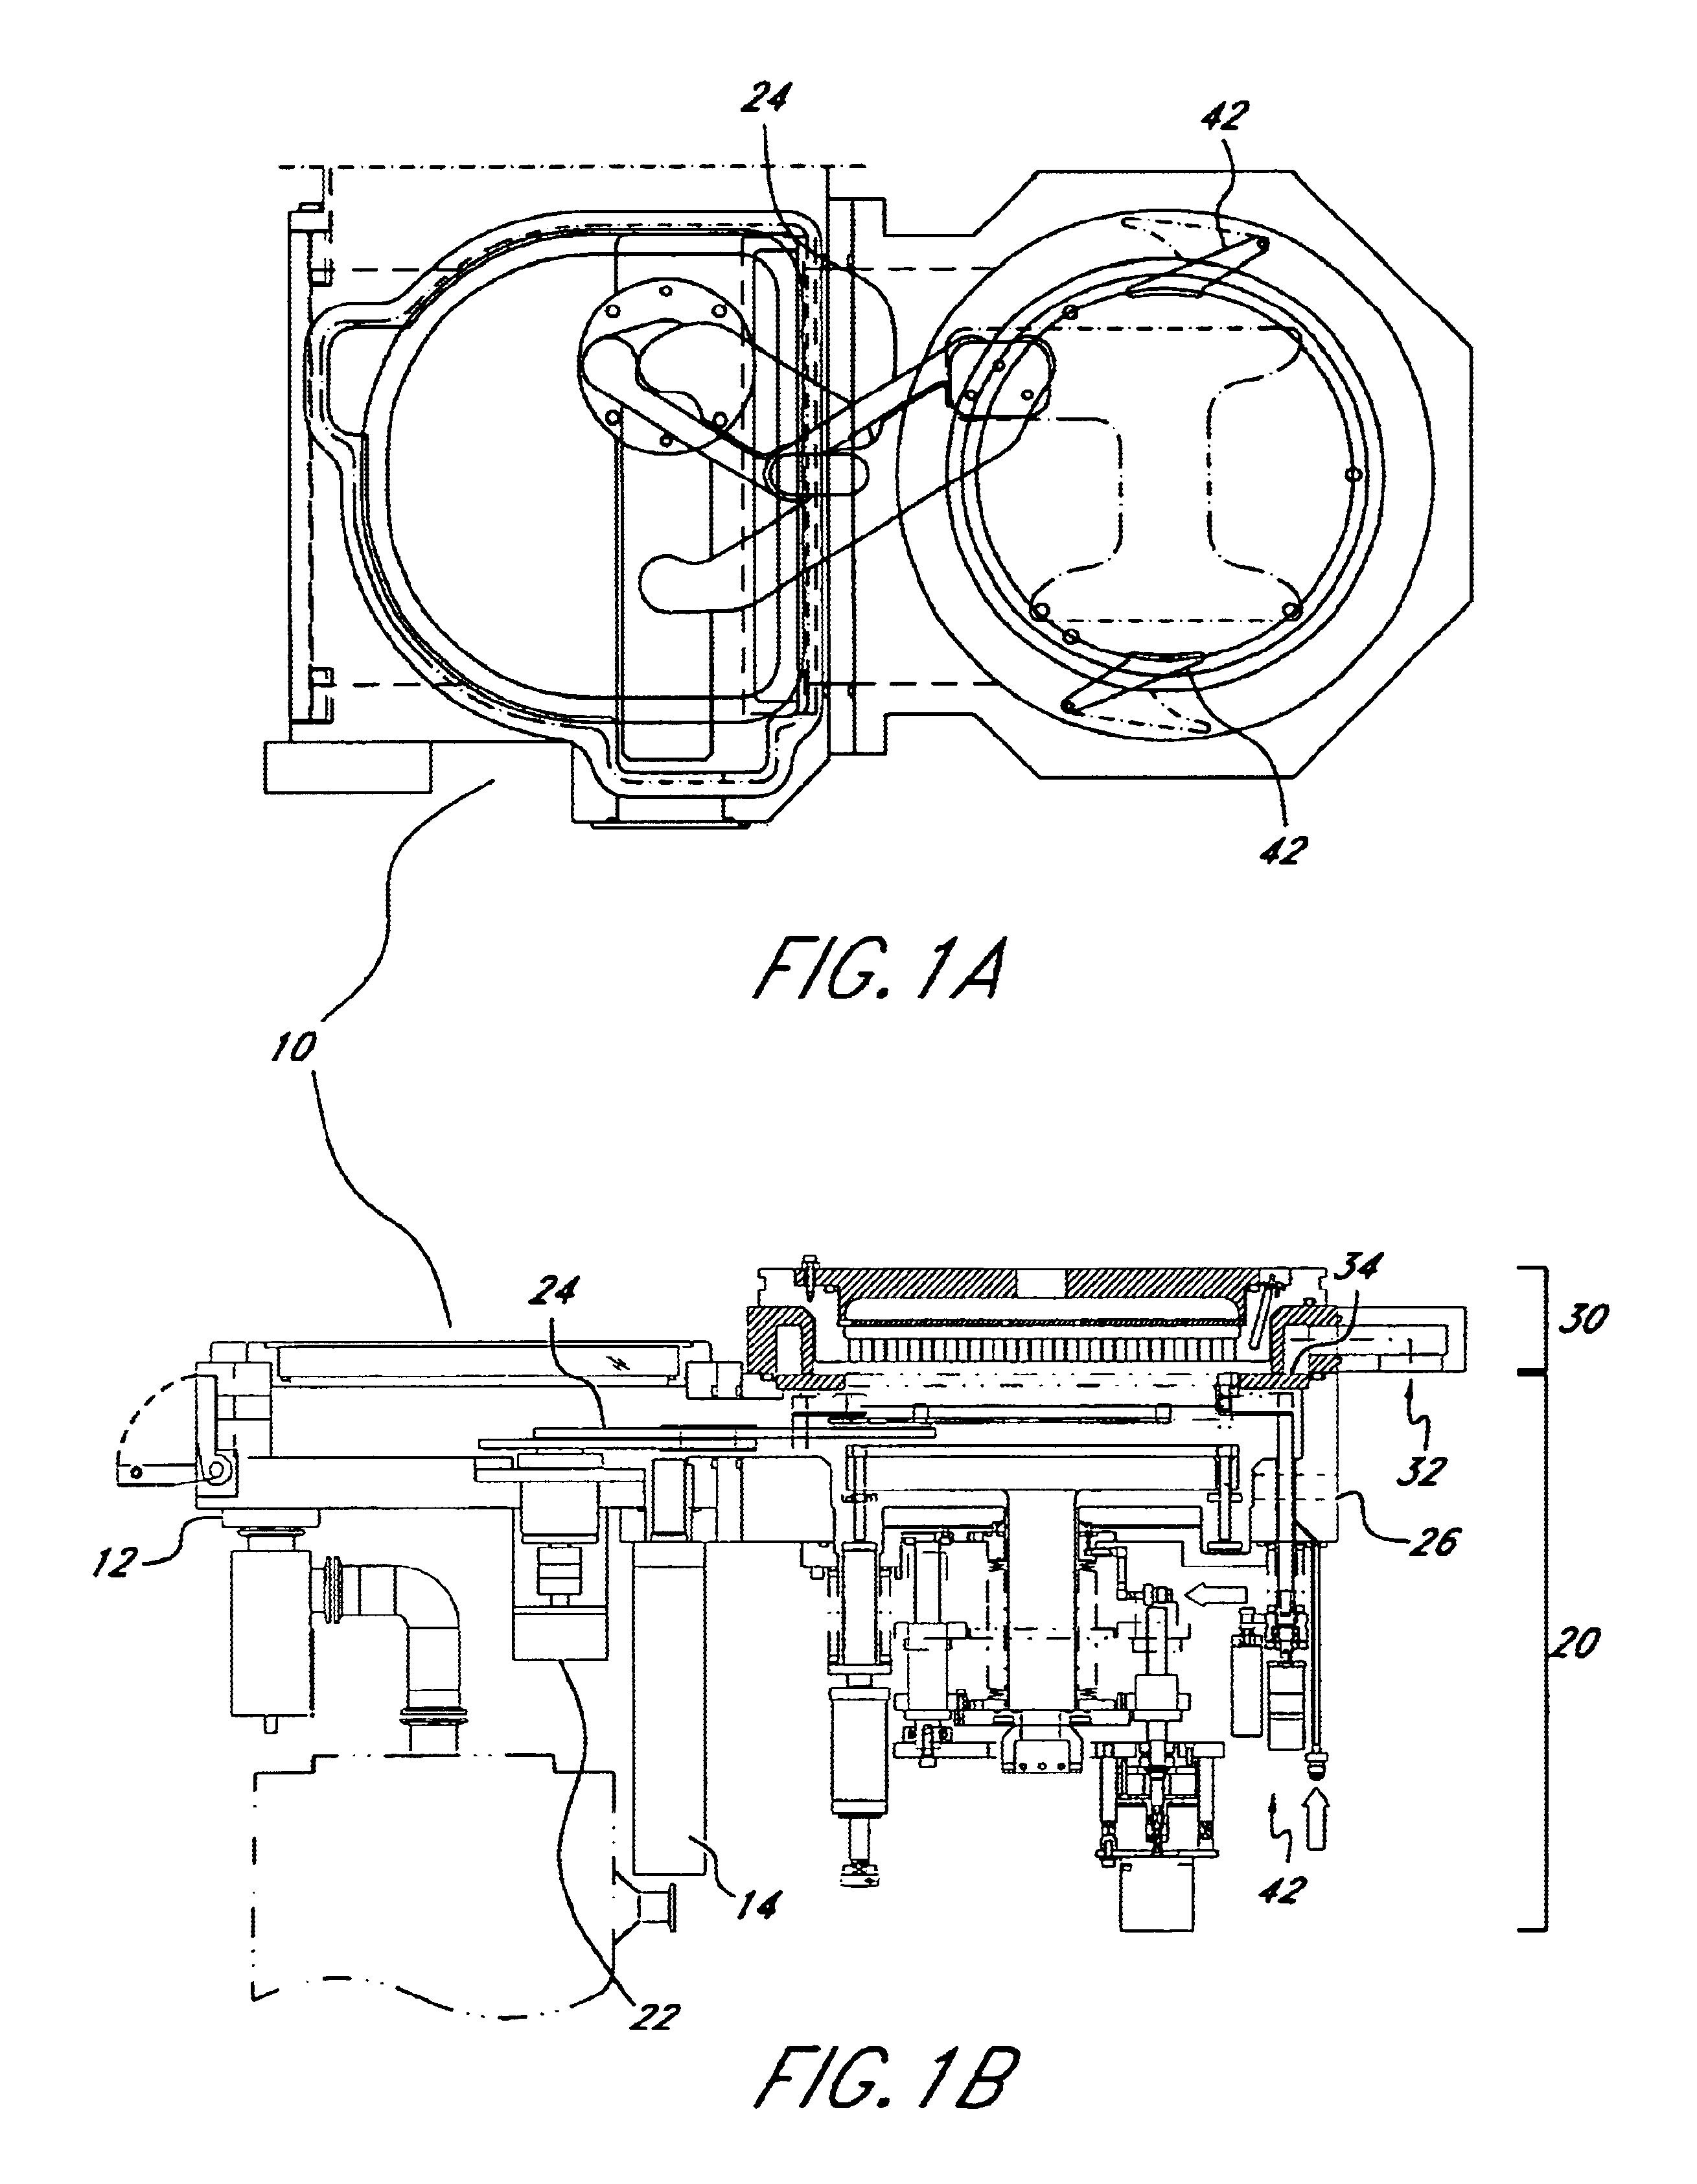 Semiconductor processing apparatus comprising chamber partitioned into reaction and transfer sections